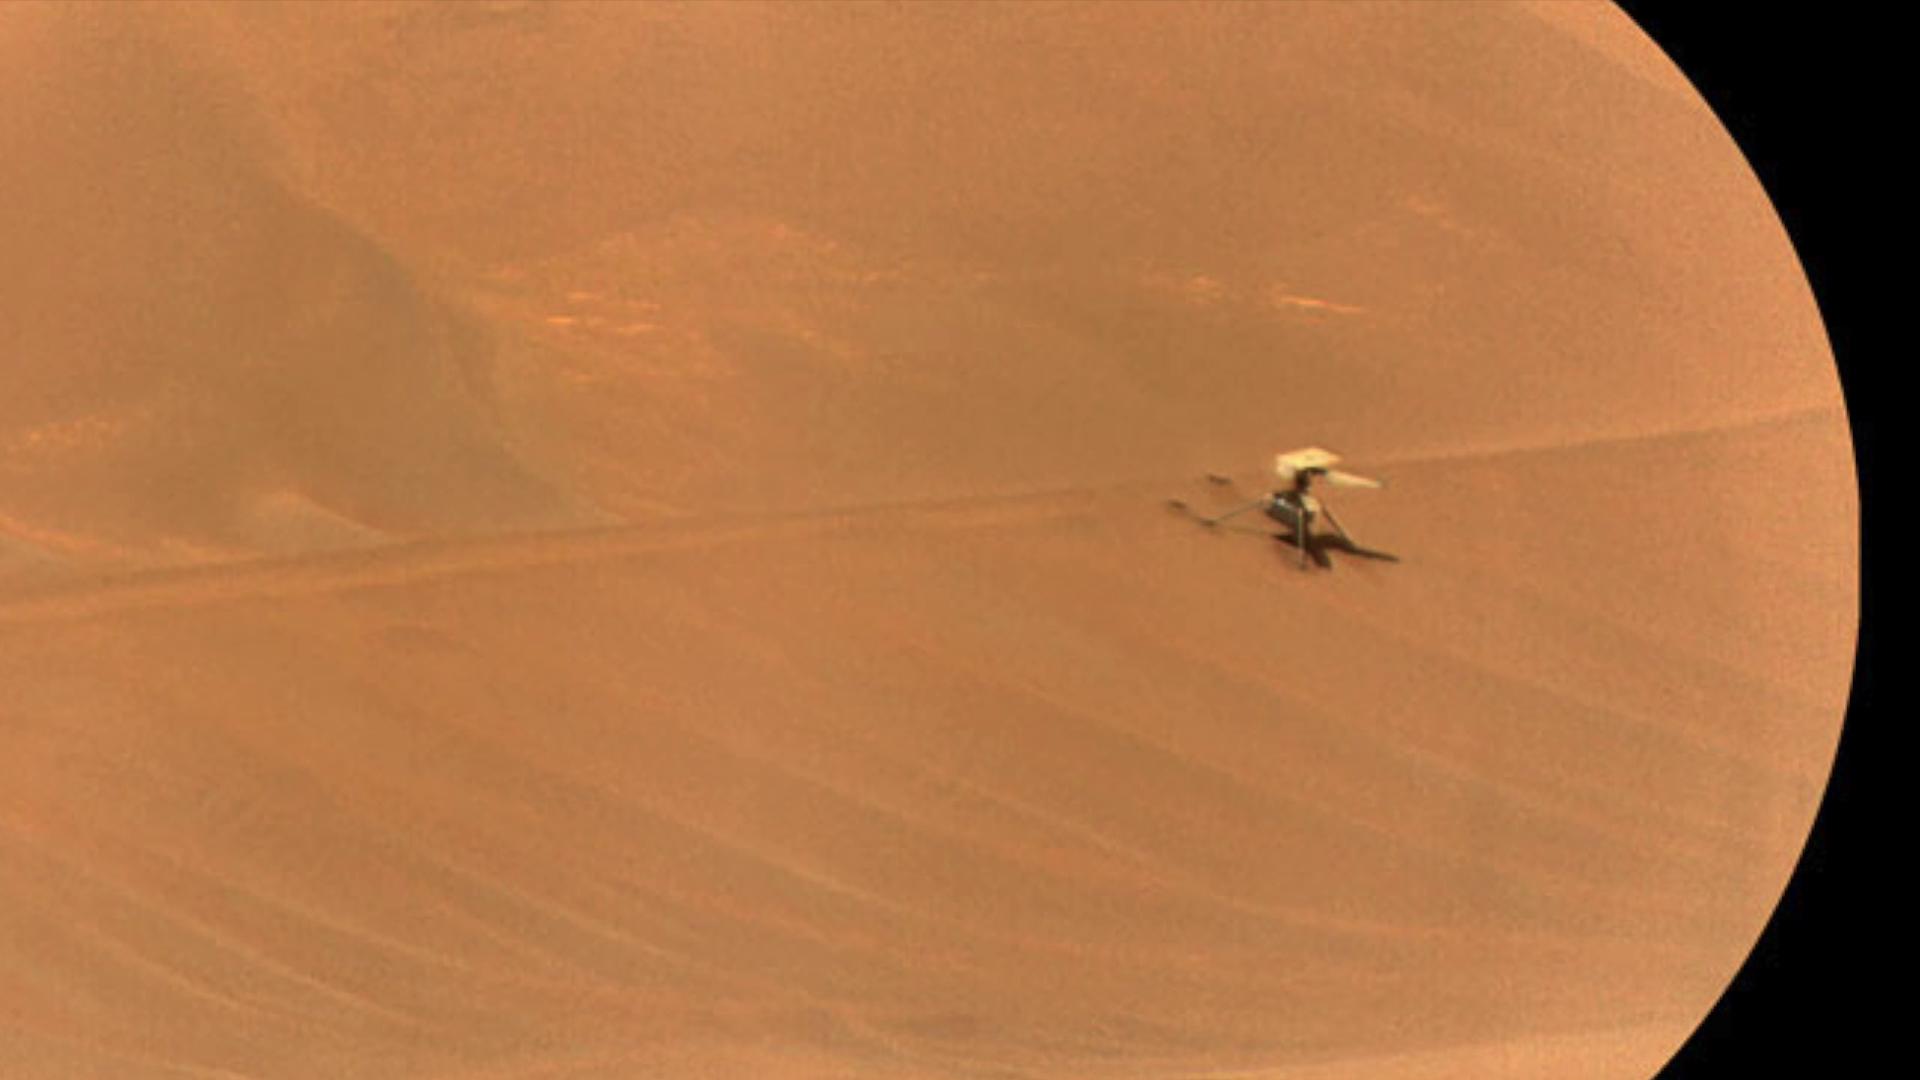 NASA's Ingenuity Mars Helicopter Team Says Goodbye... for Now